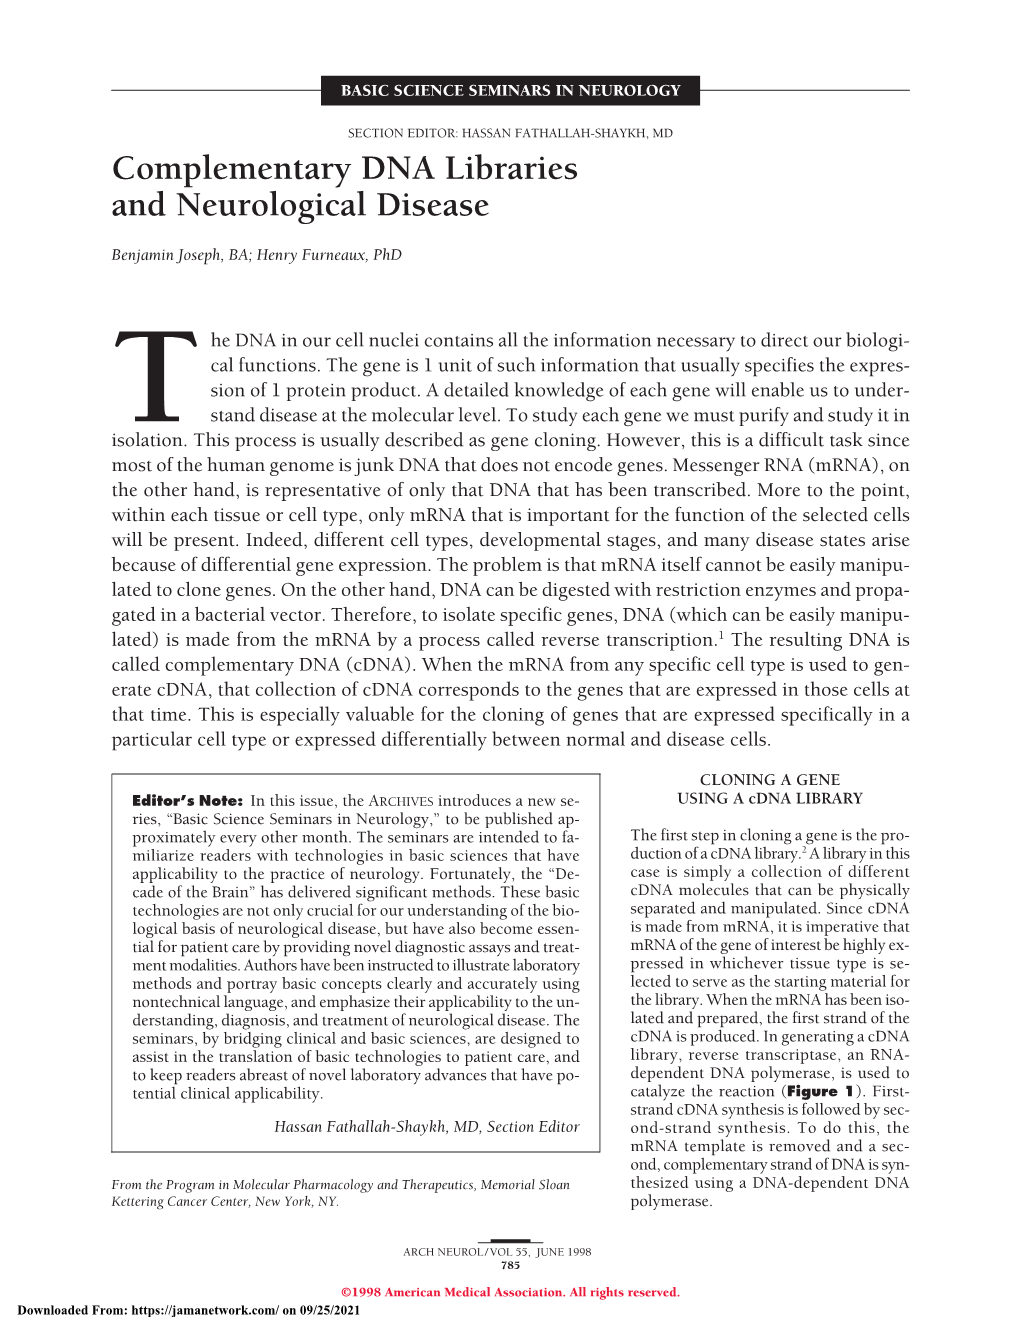 Complementary DNA Libraries and Neurological Disease